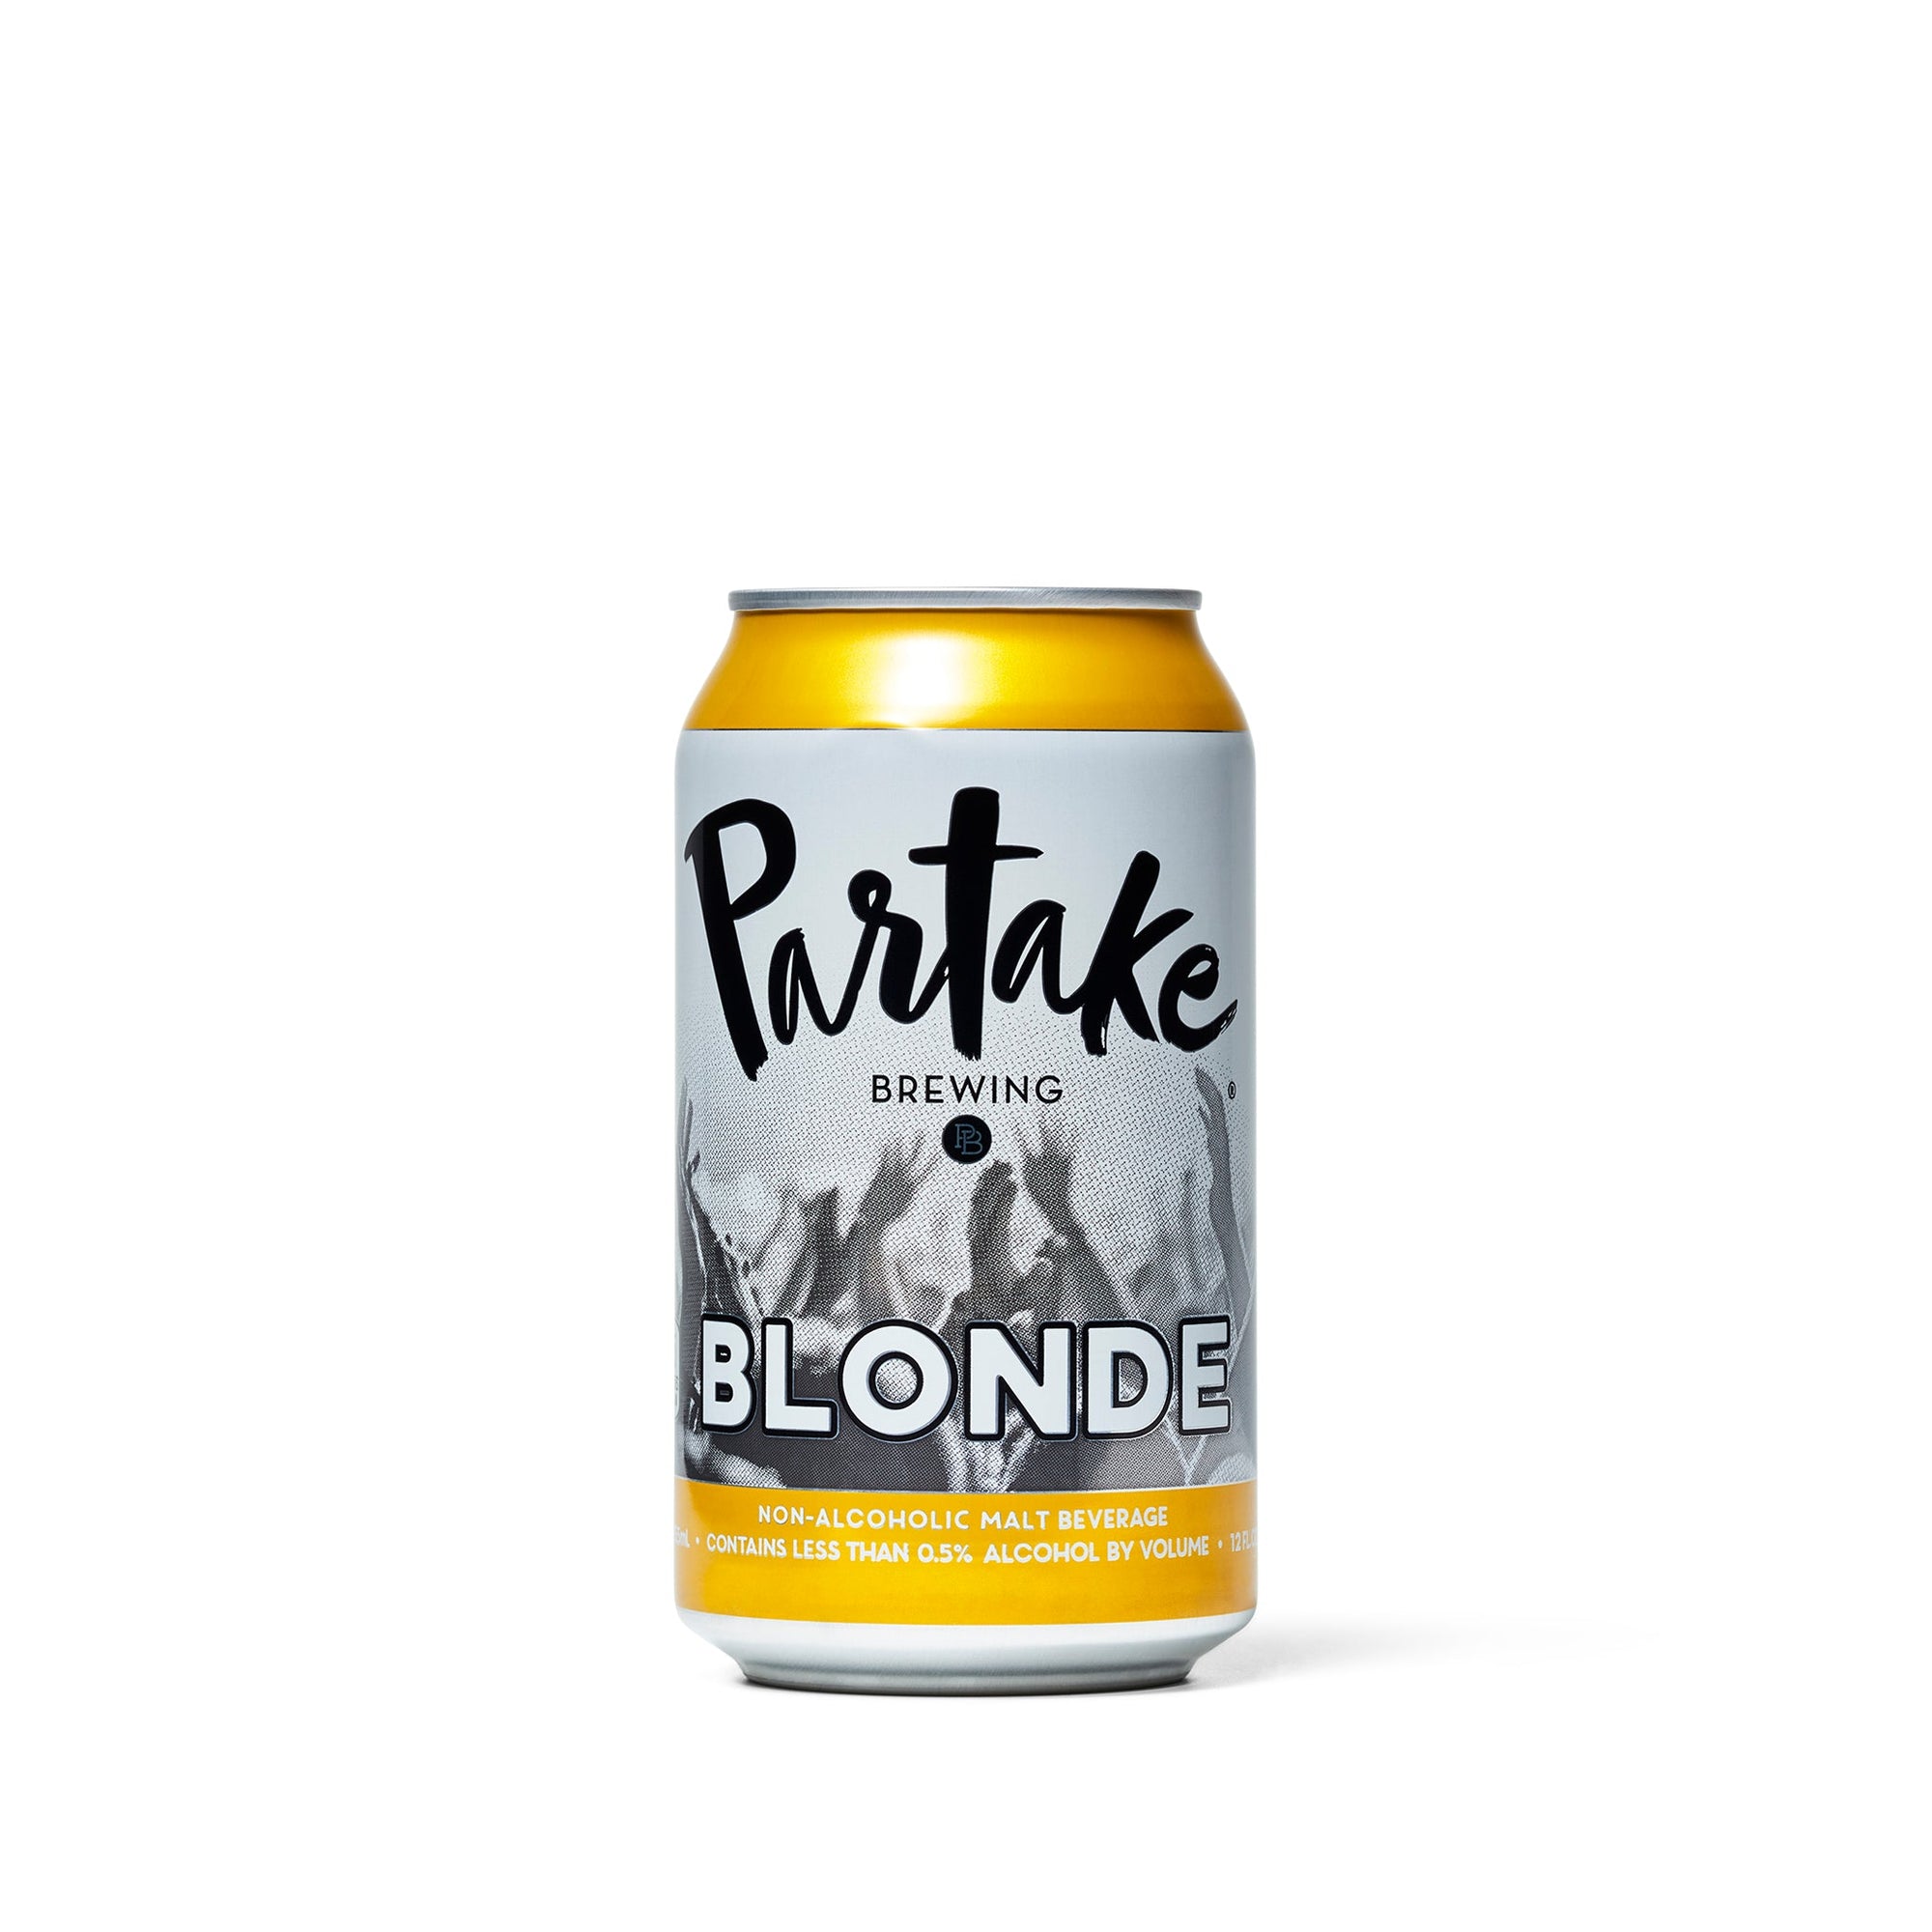 Partake Blonde - Non-Alcoholic Beer (6 Pack) - Boisson